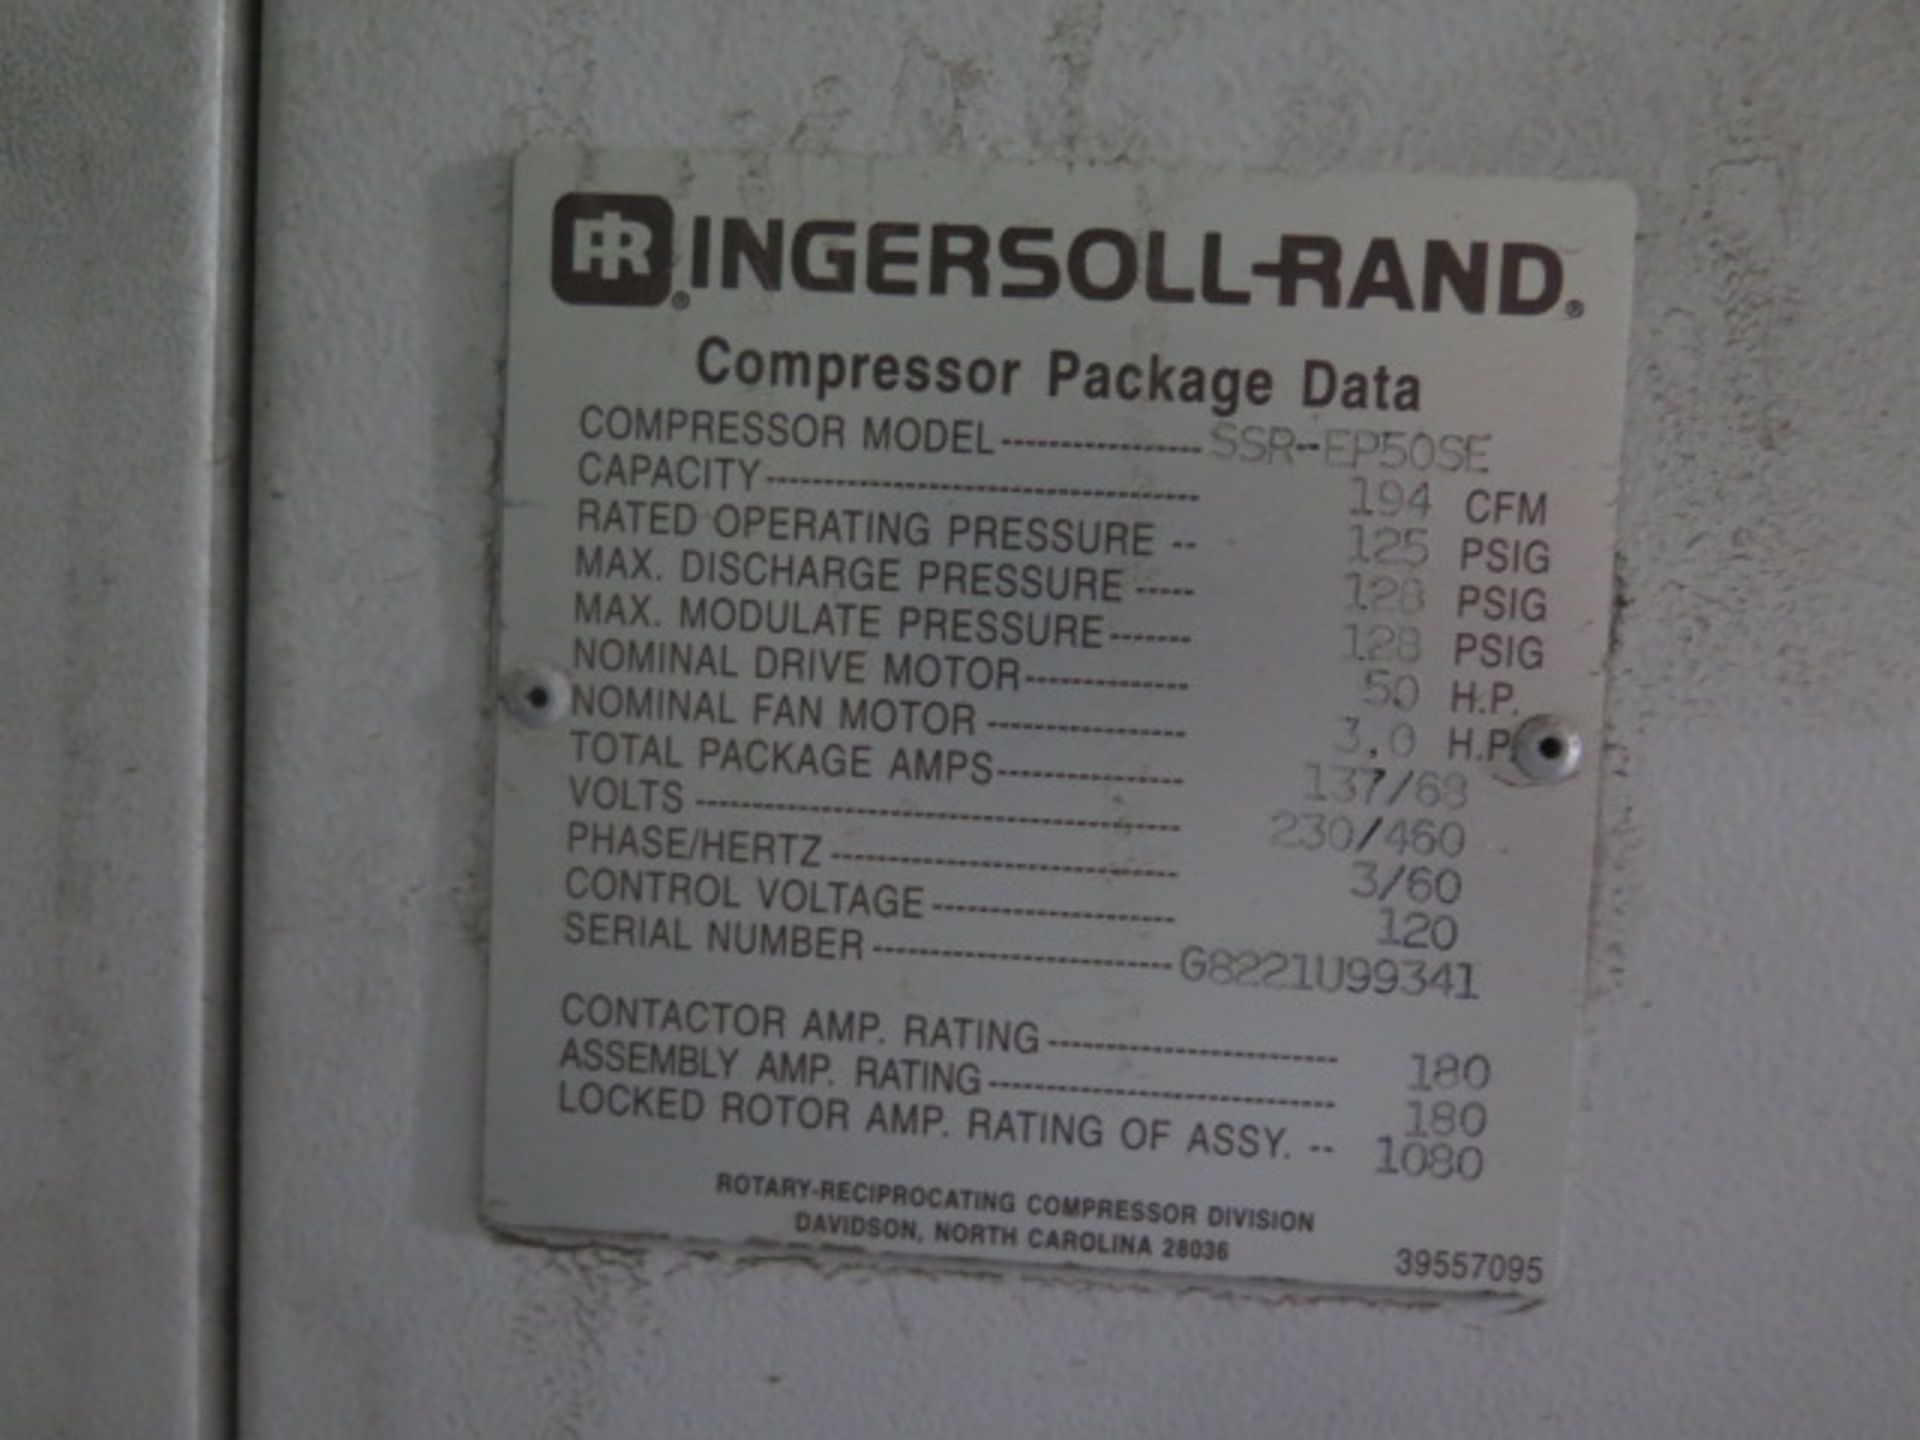 Ingersoll Rand SSR-EP50SE 50Hp Rotary Air Comp s/n G8221U99341 w/ Intellisys Controls, SOLD AS IS - Image 7 of 7